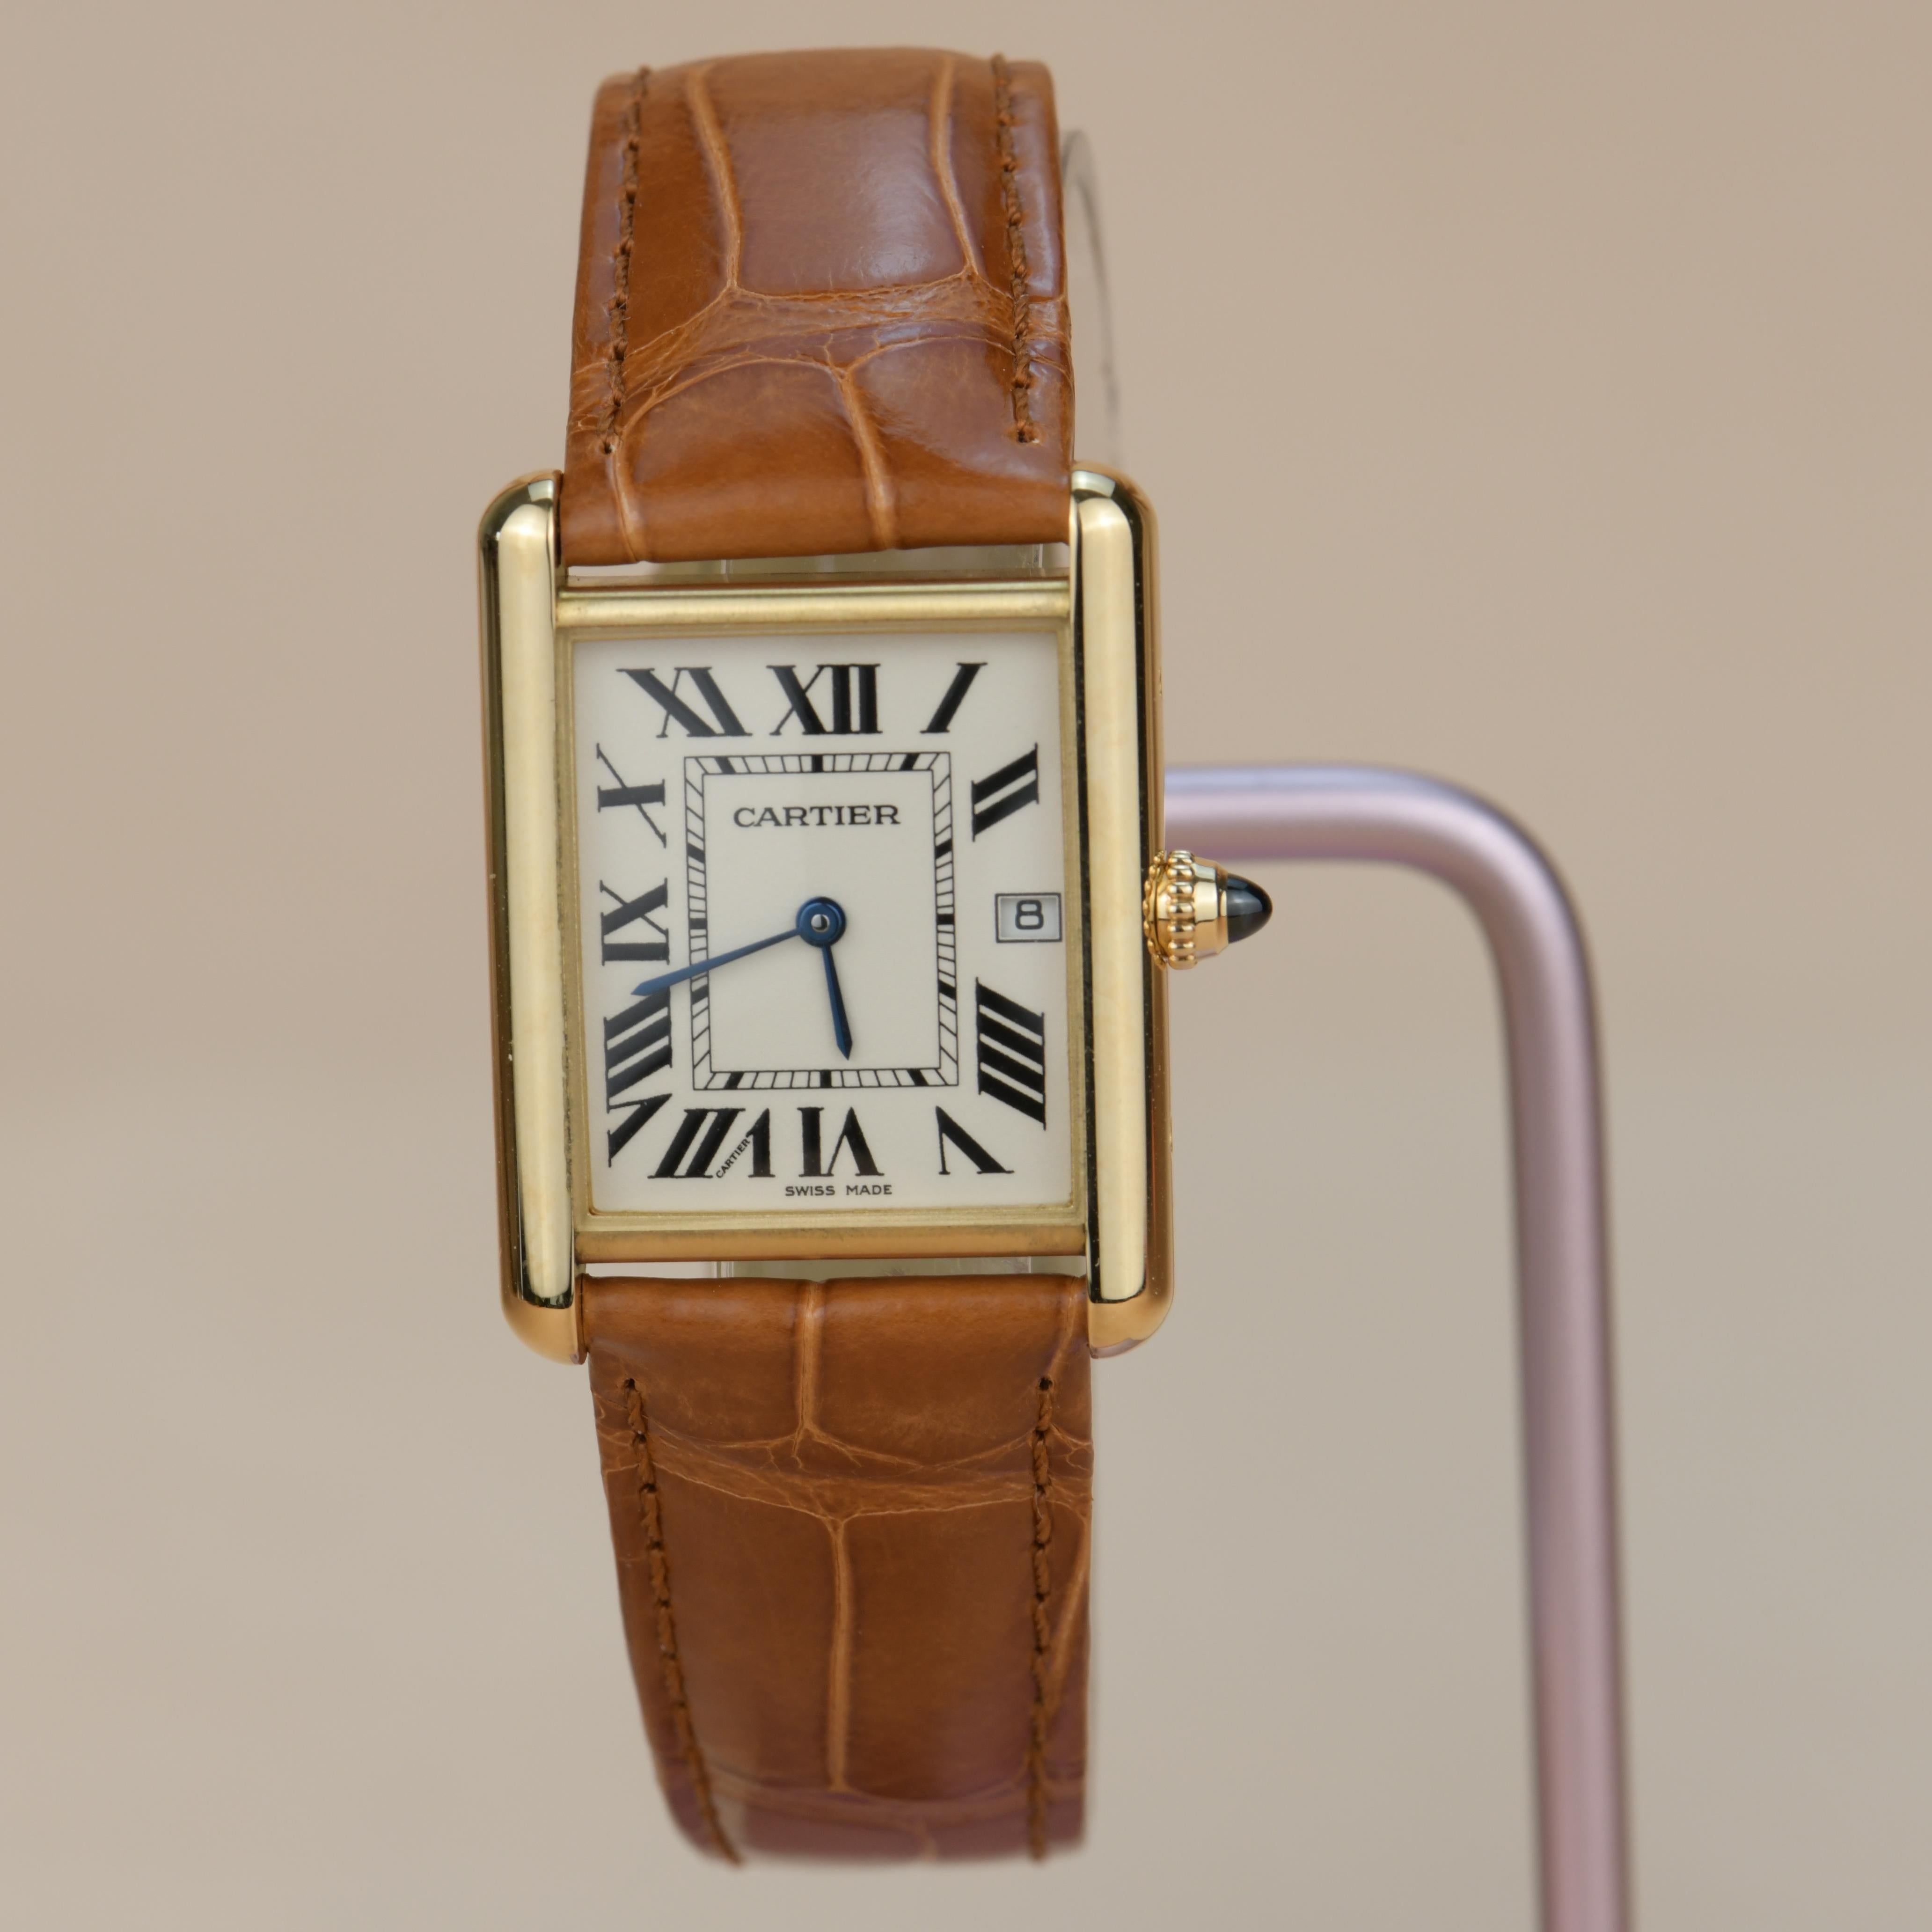 Dandelion Antiques Code	  AT-0759
Brand	                                  Cartier
Model No.	                          W1529756
Retail Price                                £9,000 / $12500
____________________________________

Date	                   